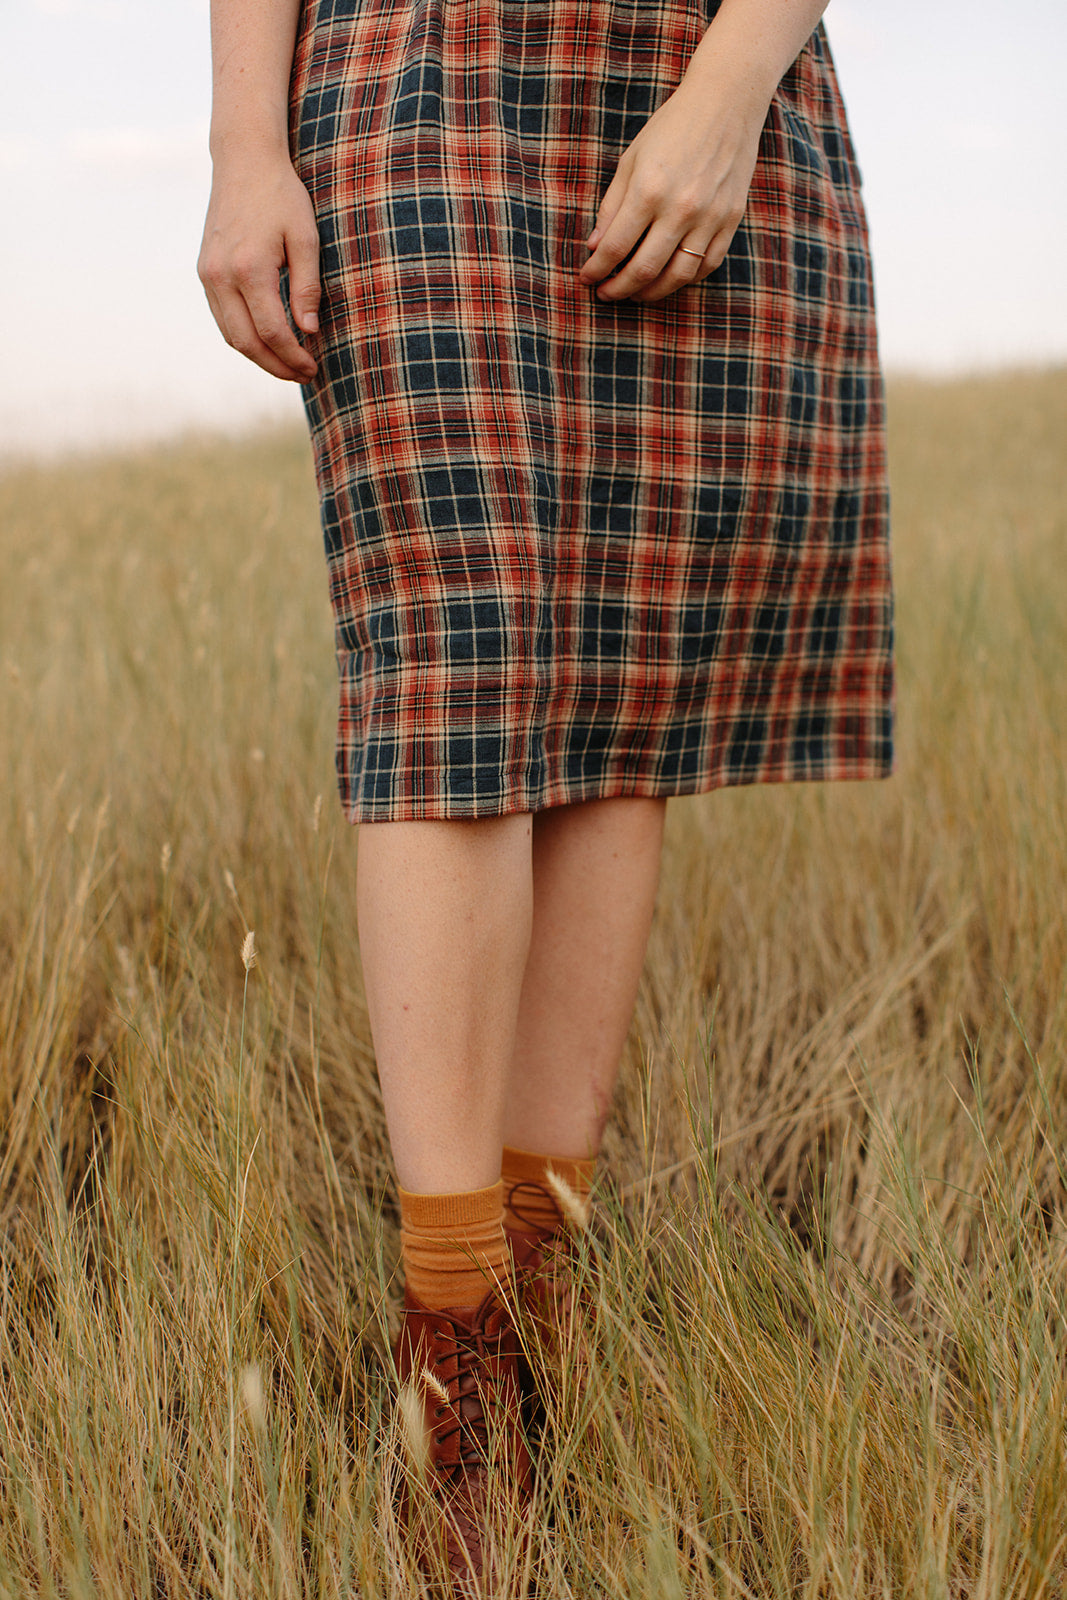 Pyne and Smith Model No. 30 Margate Plaid linen dress with tan leather boots